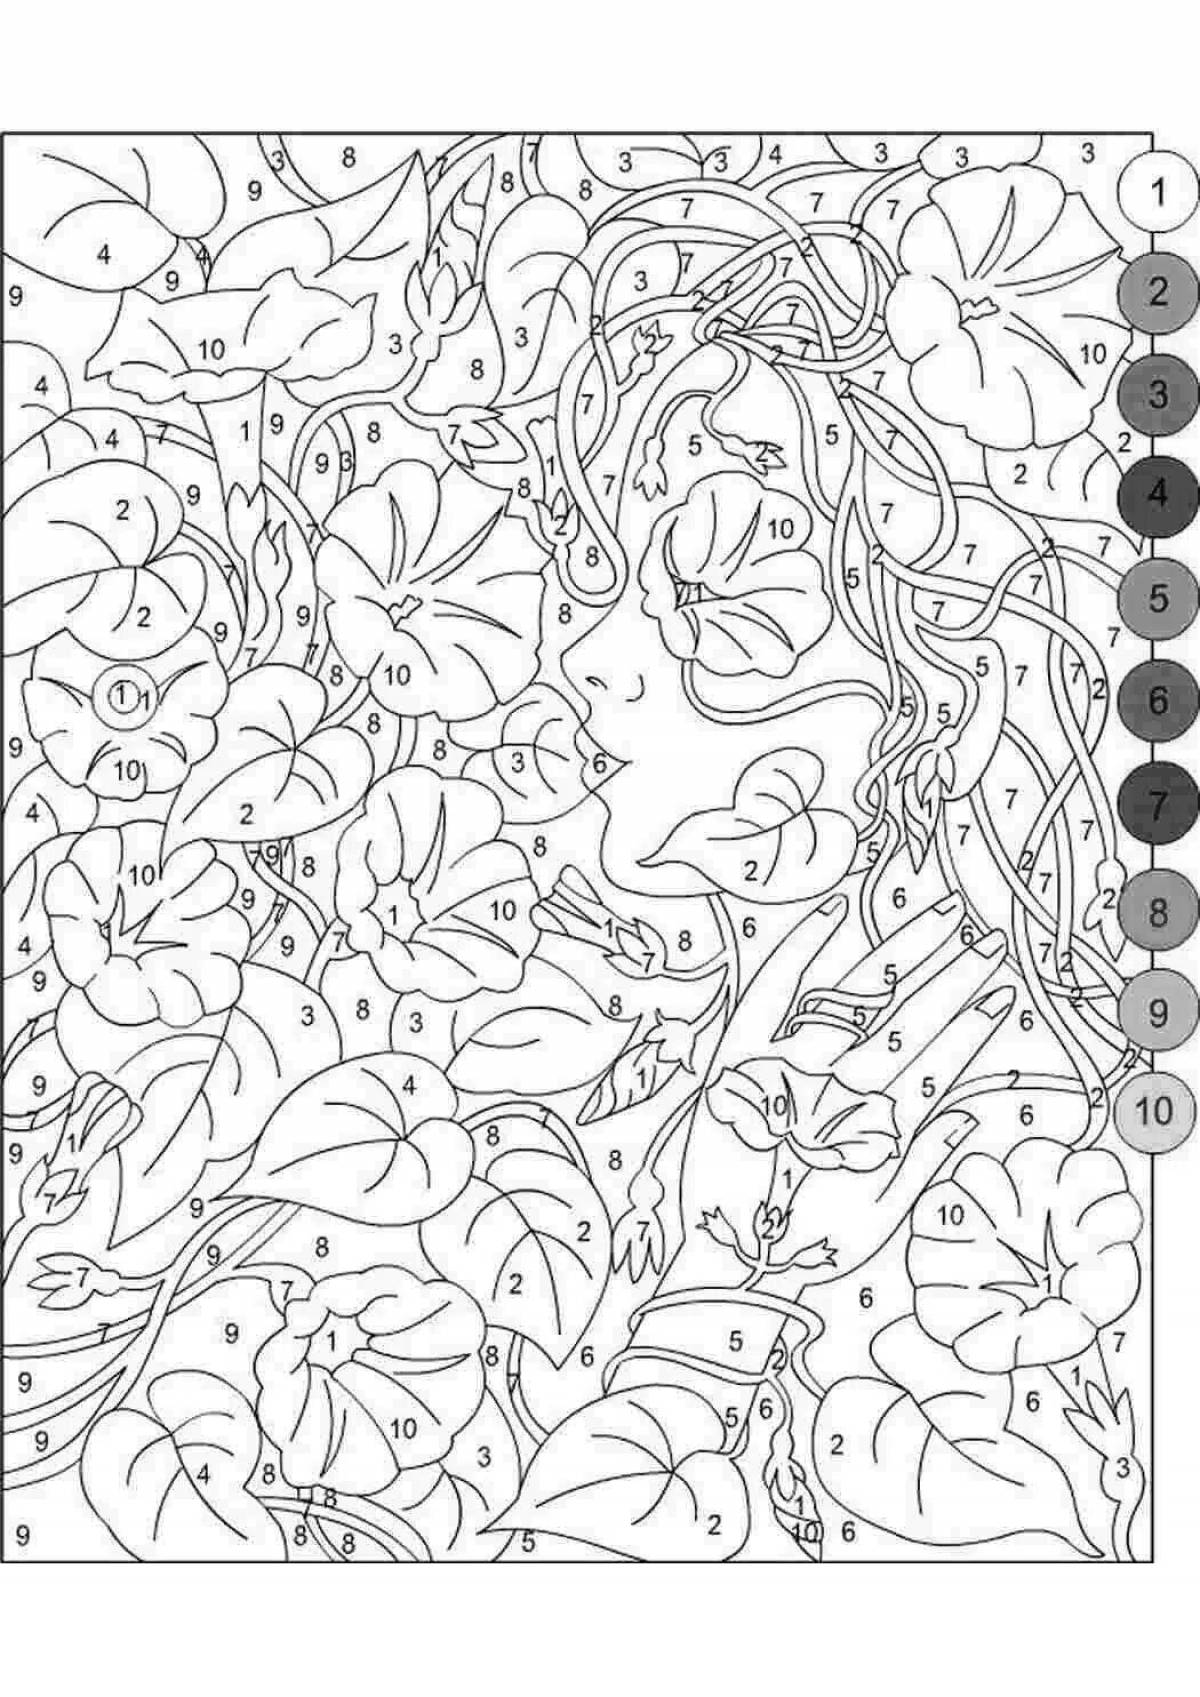 Color glowing coloring book with hints